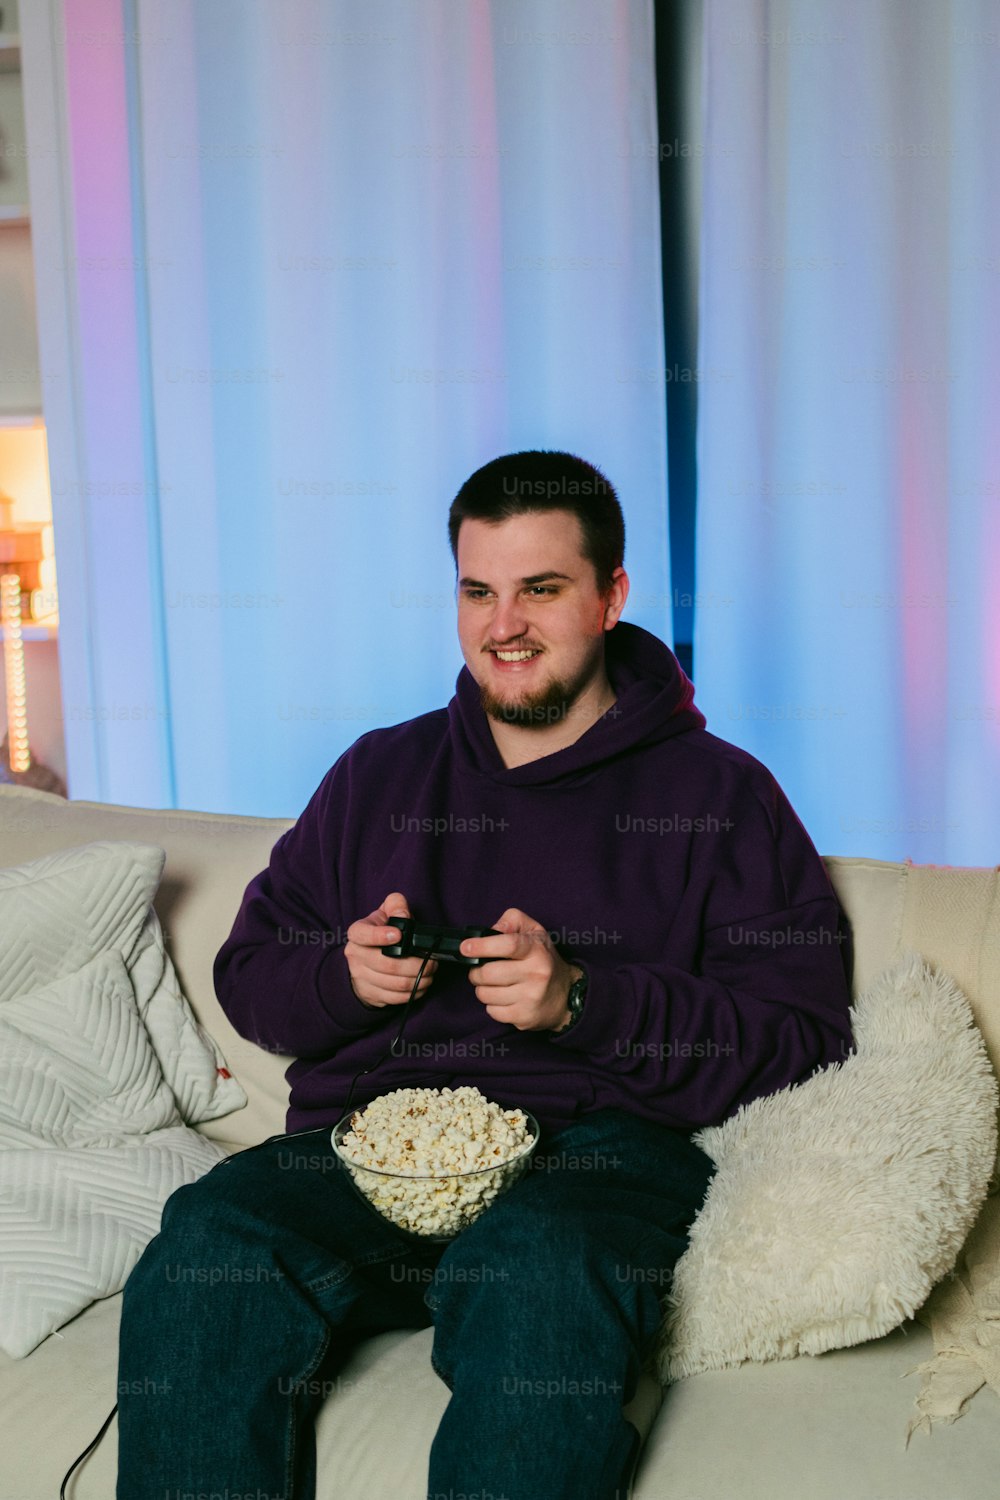 a man sitting on a couch holding a remote control